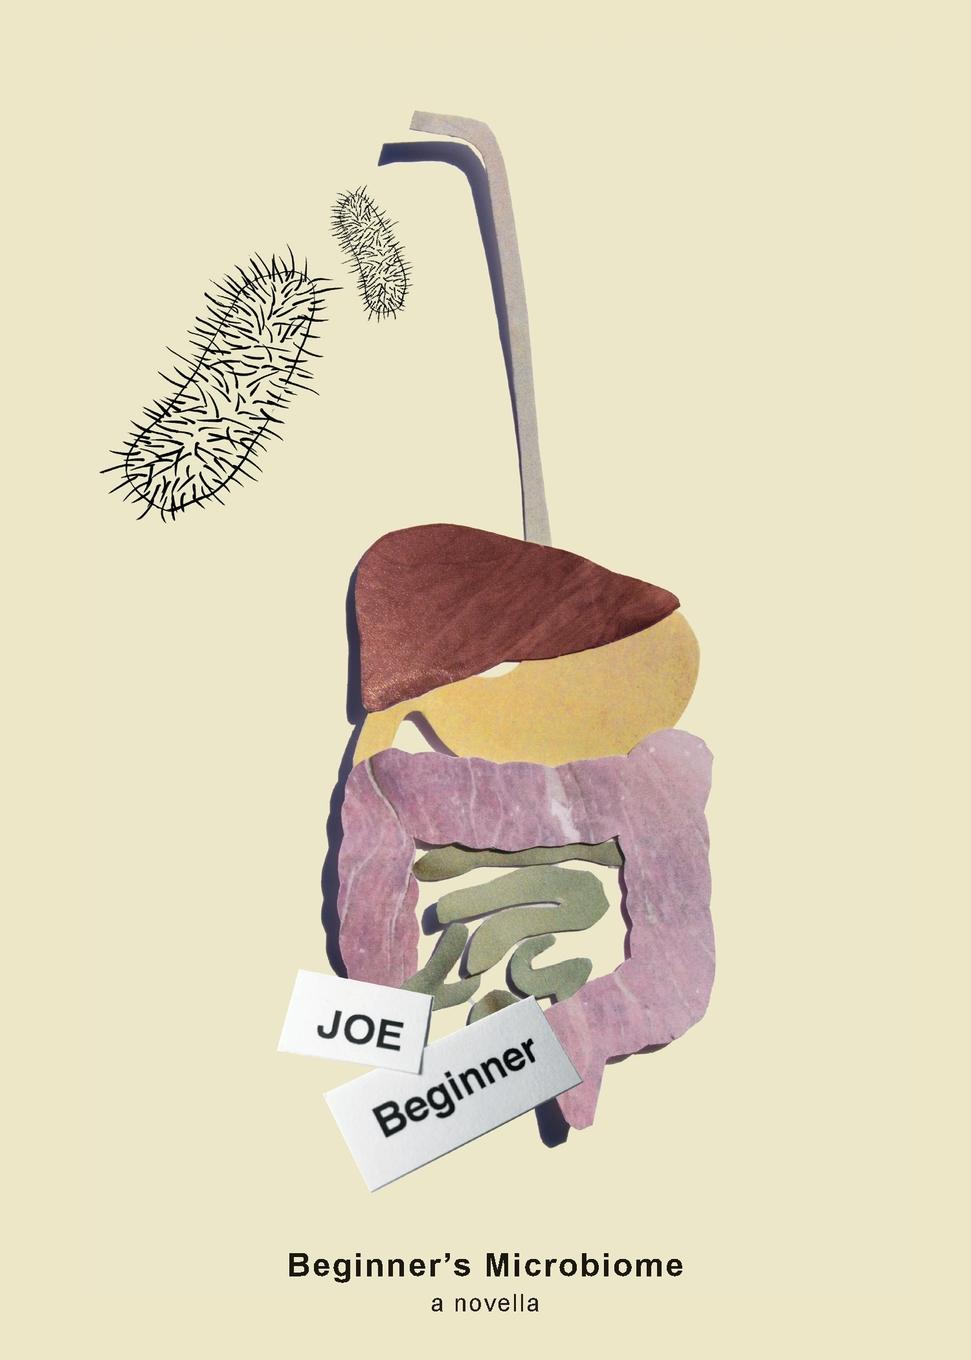 Beginner Joe Beginner.s Microbiome. A story about a man who changes what he eats